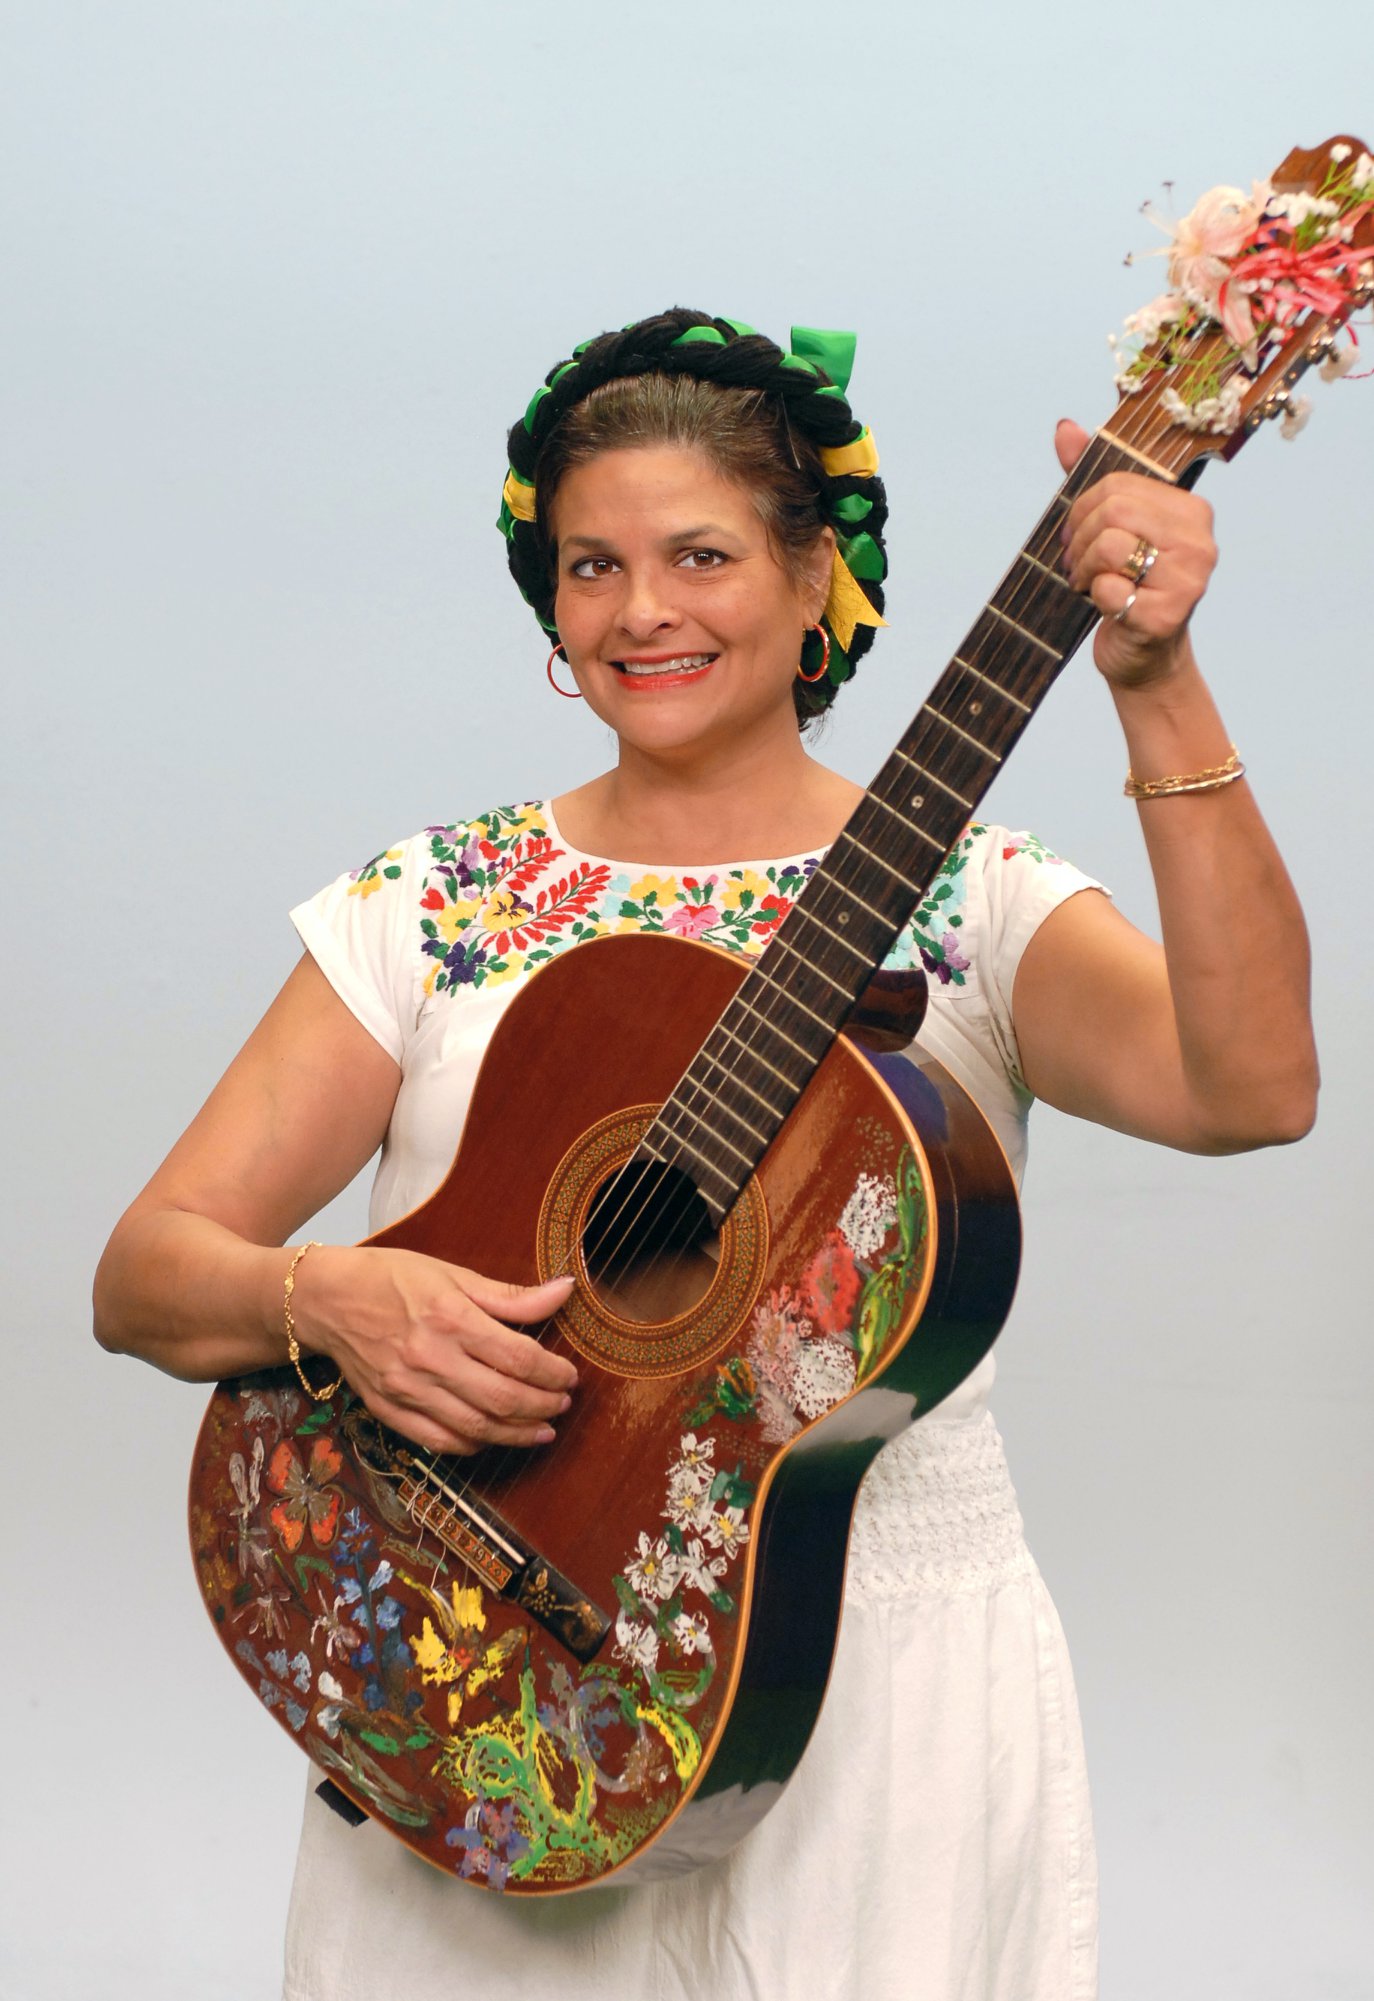 A photo of Georgette Baker in traditional Mexican garb while holding a guitar